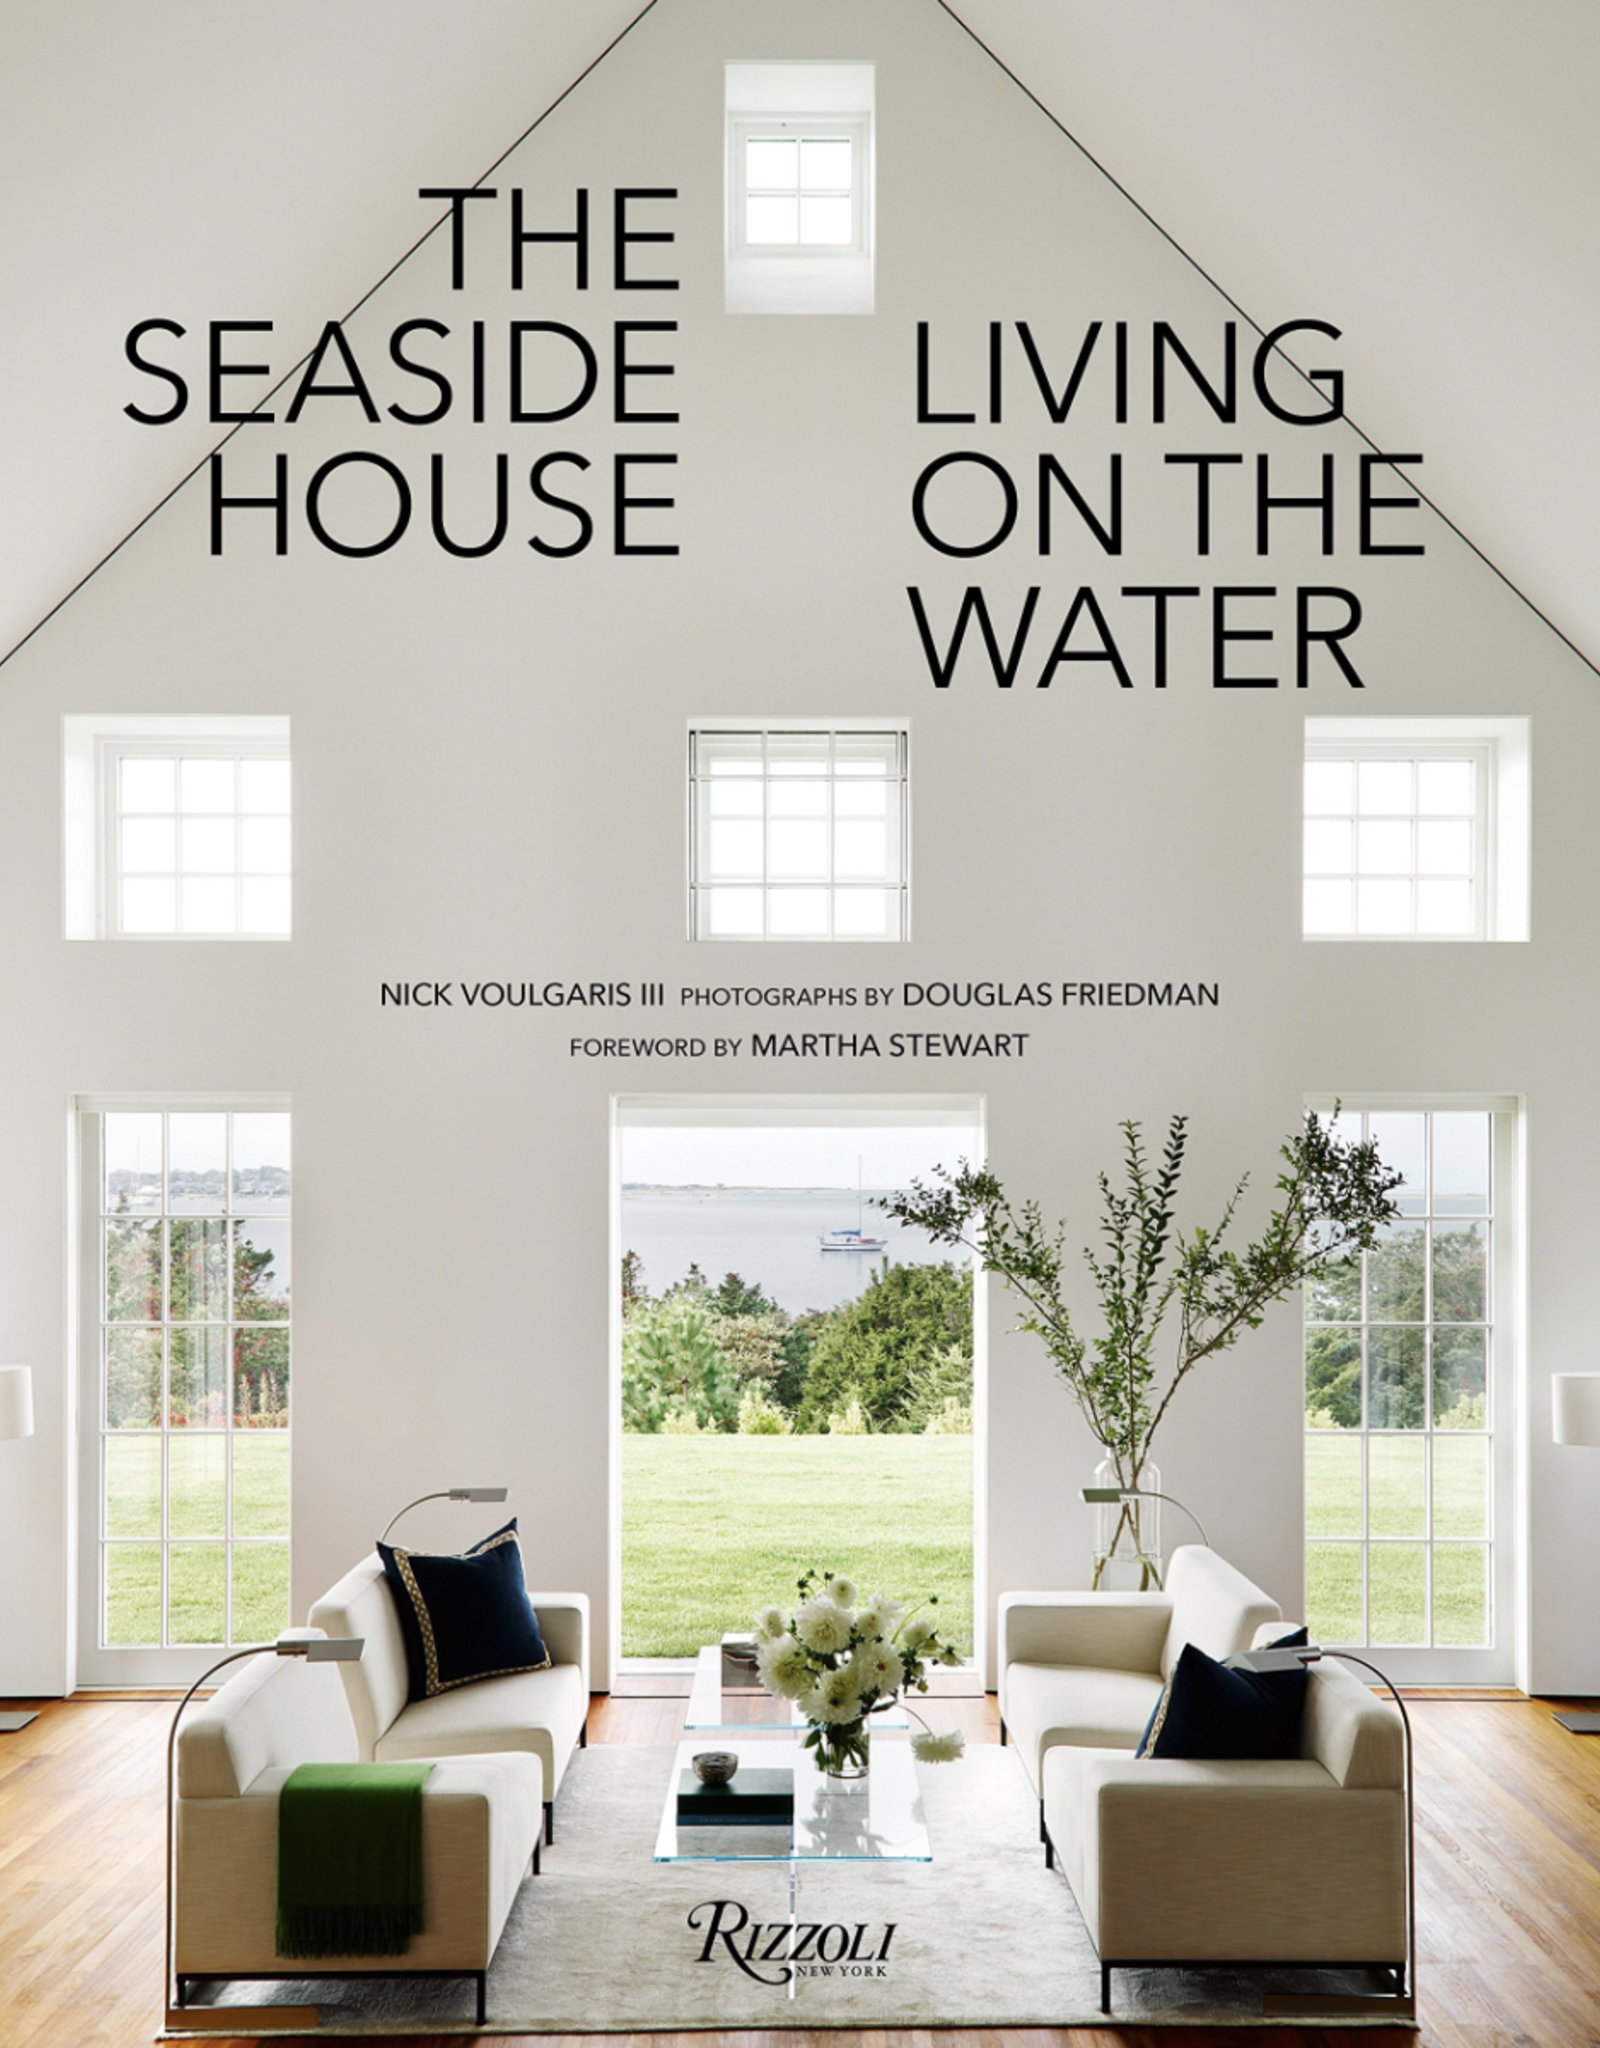 The Seaside House - Living on the Water